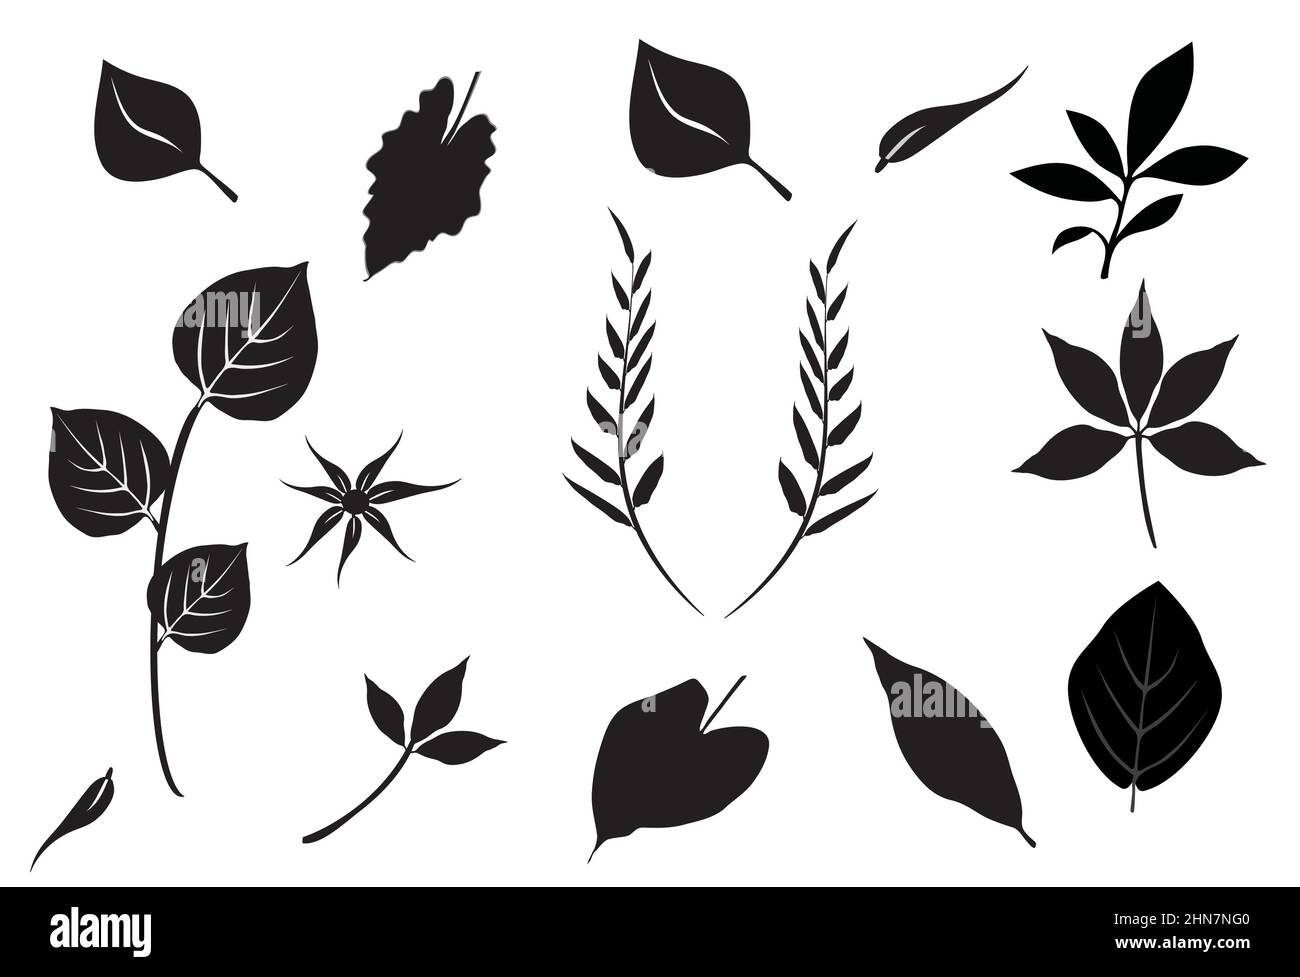 silhouette of leaves of different shapes and seizes on white background Stock Vector